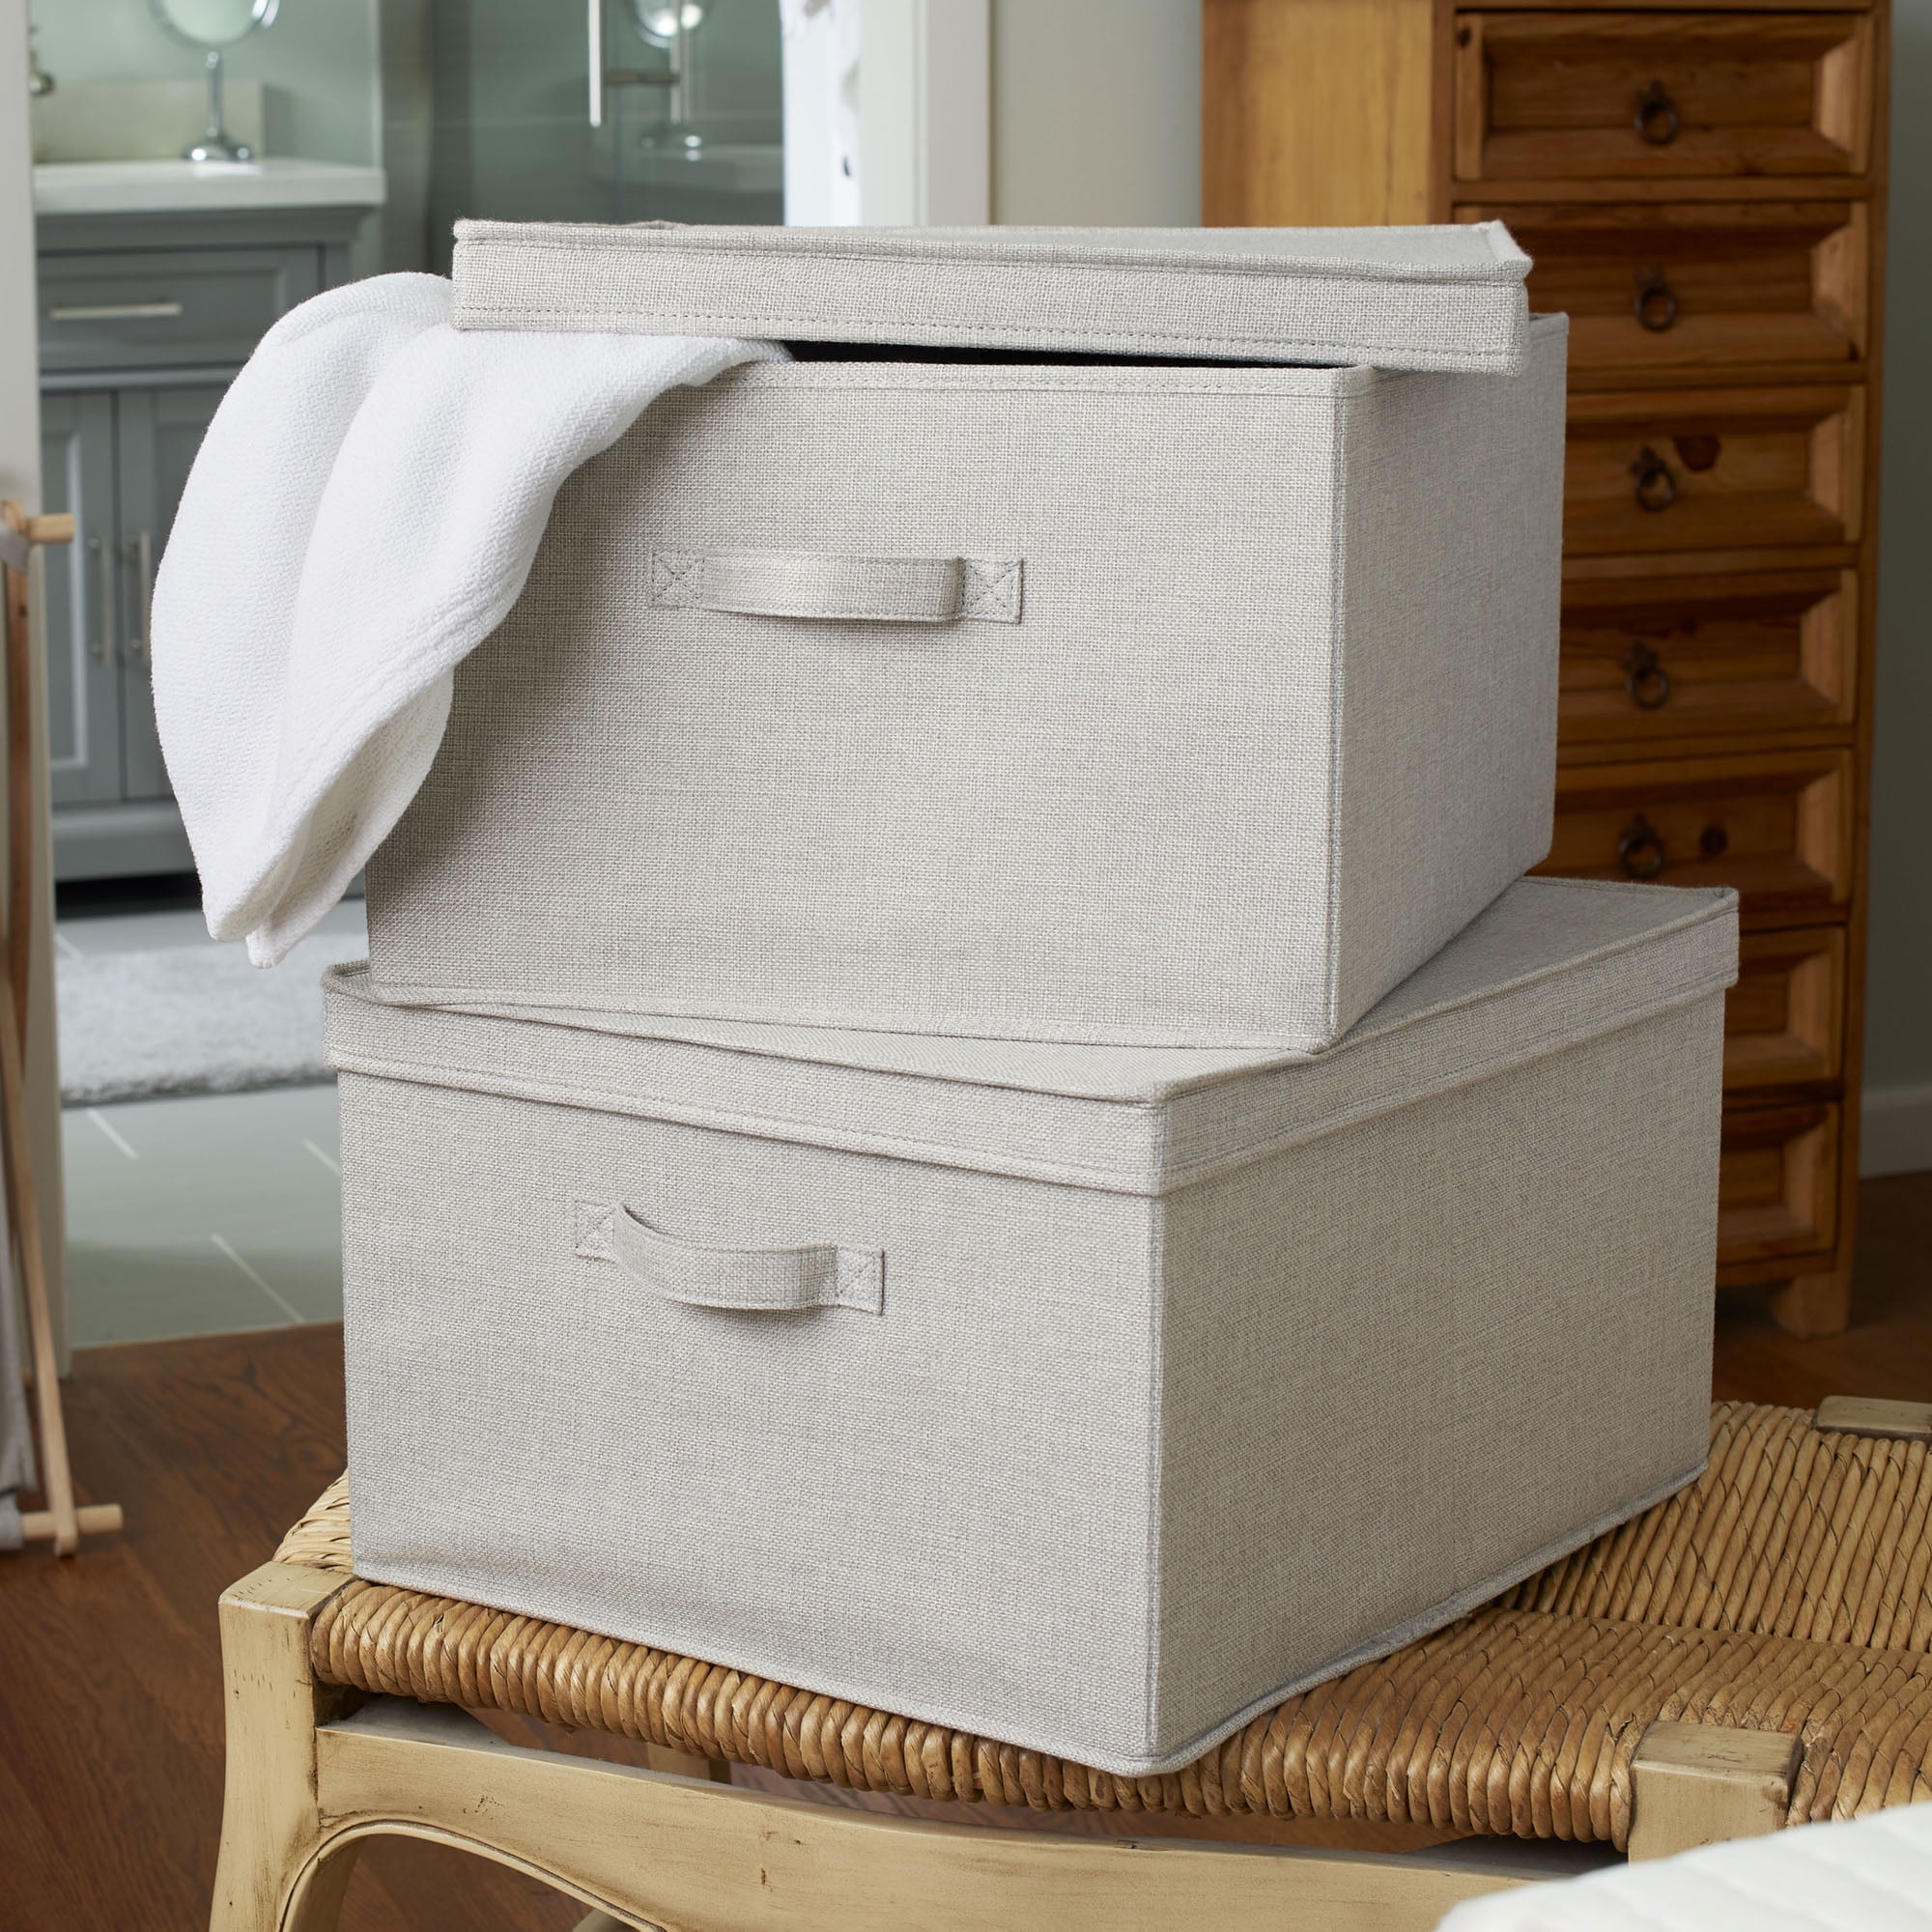 Details about   Made By Design Fabric Storage Bin Lt Gray  24.75"x12.75"x6.5" 